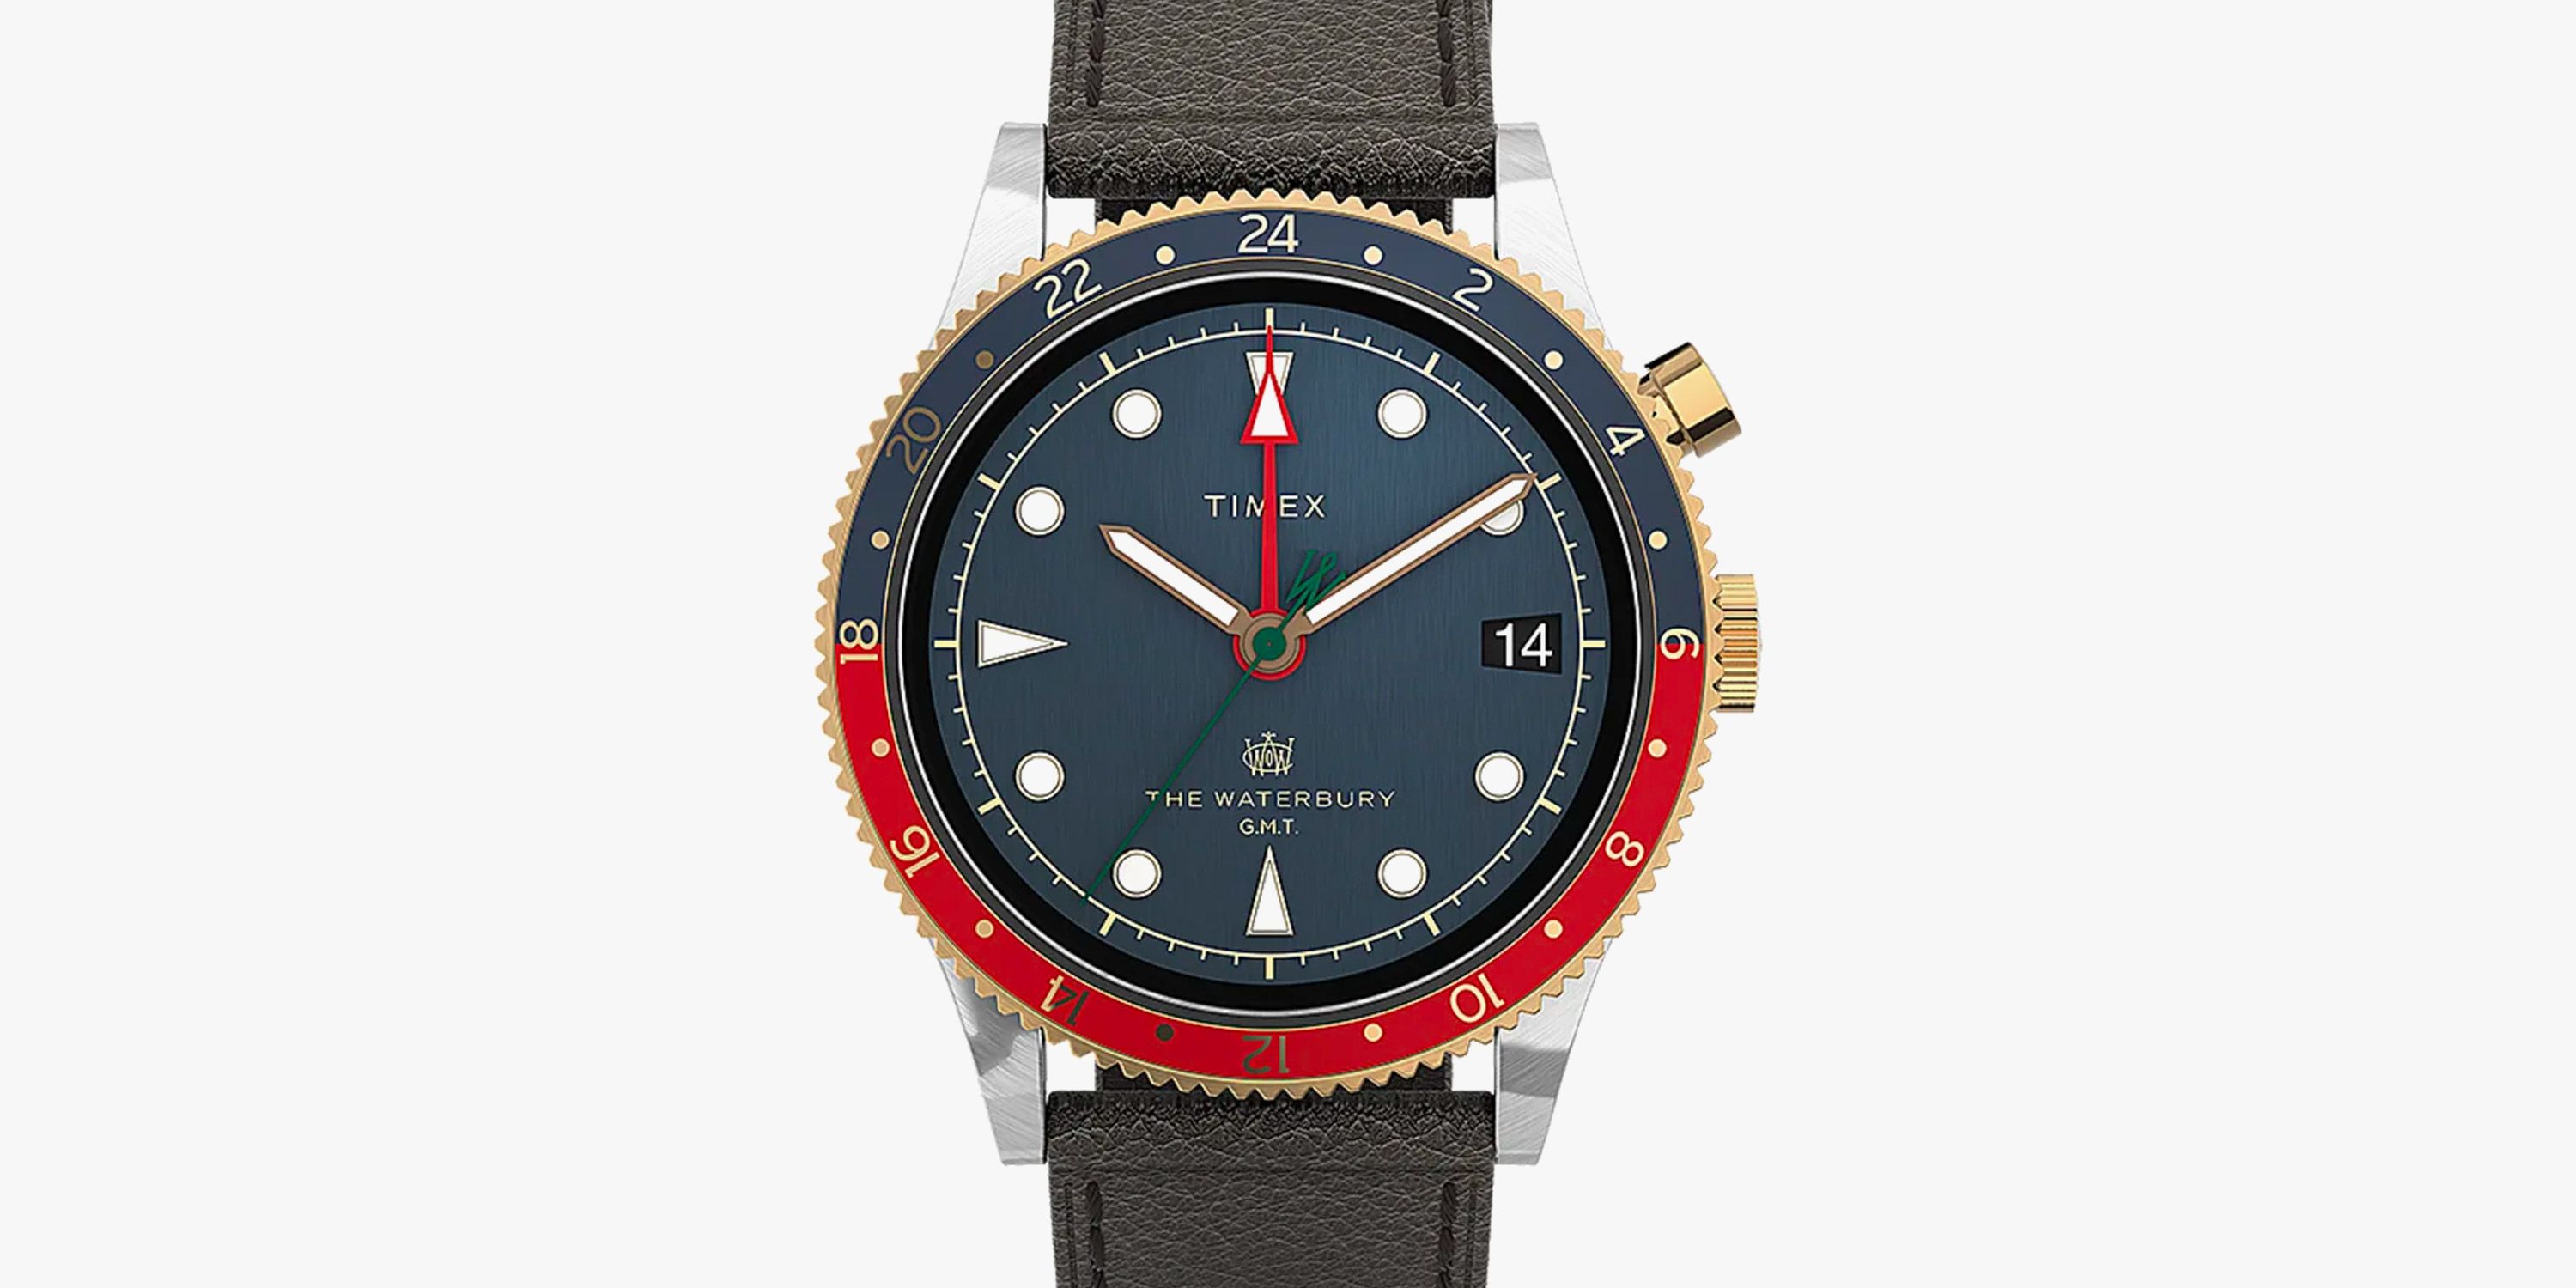 Waiting for a Rolex GMT? This Timex Watch Could Tide You Over